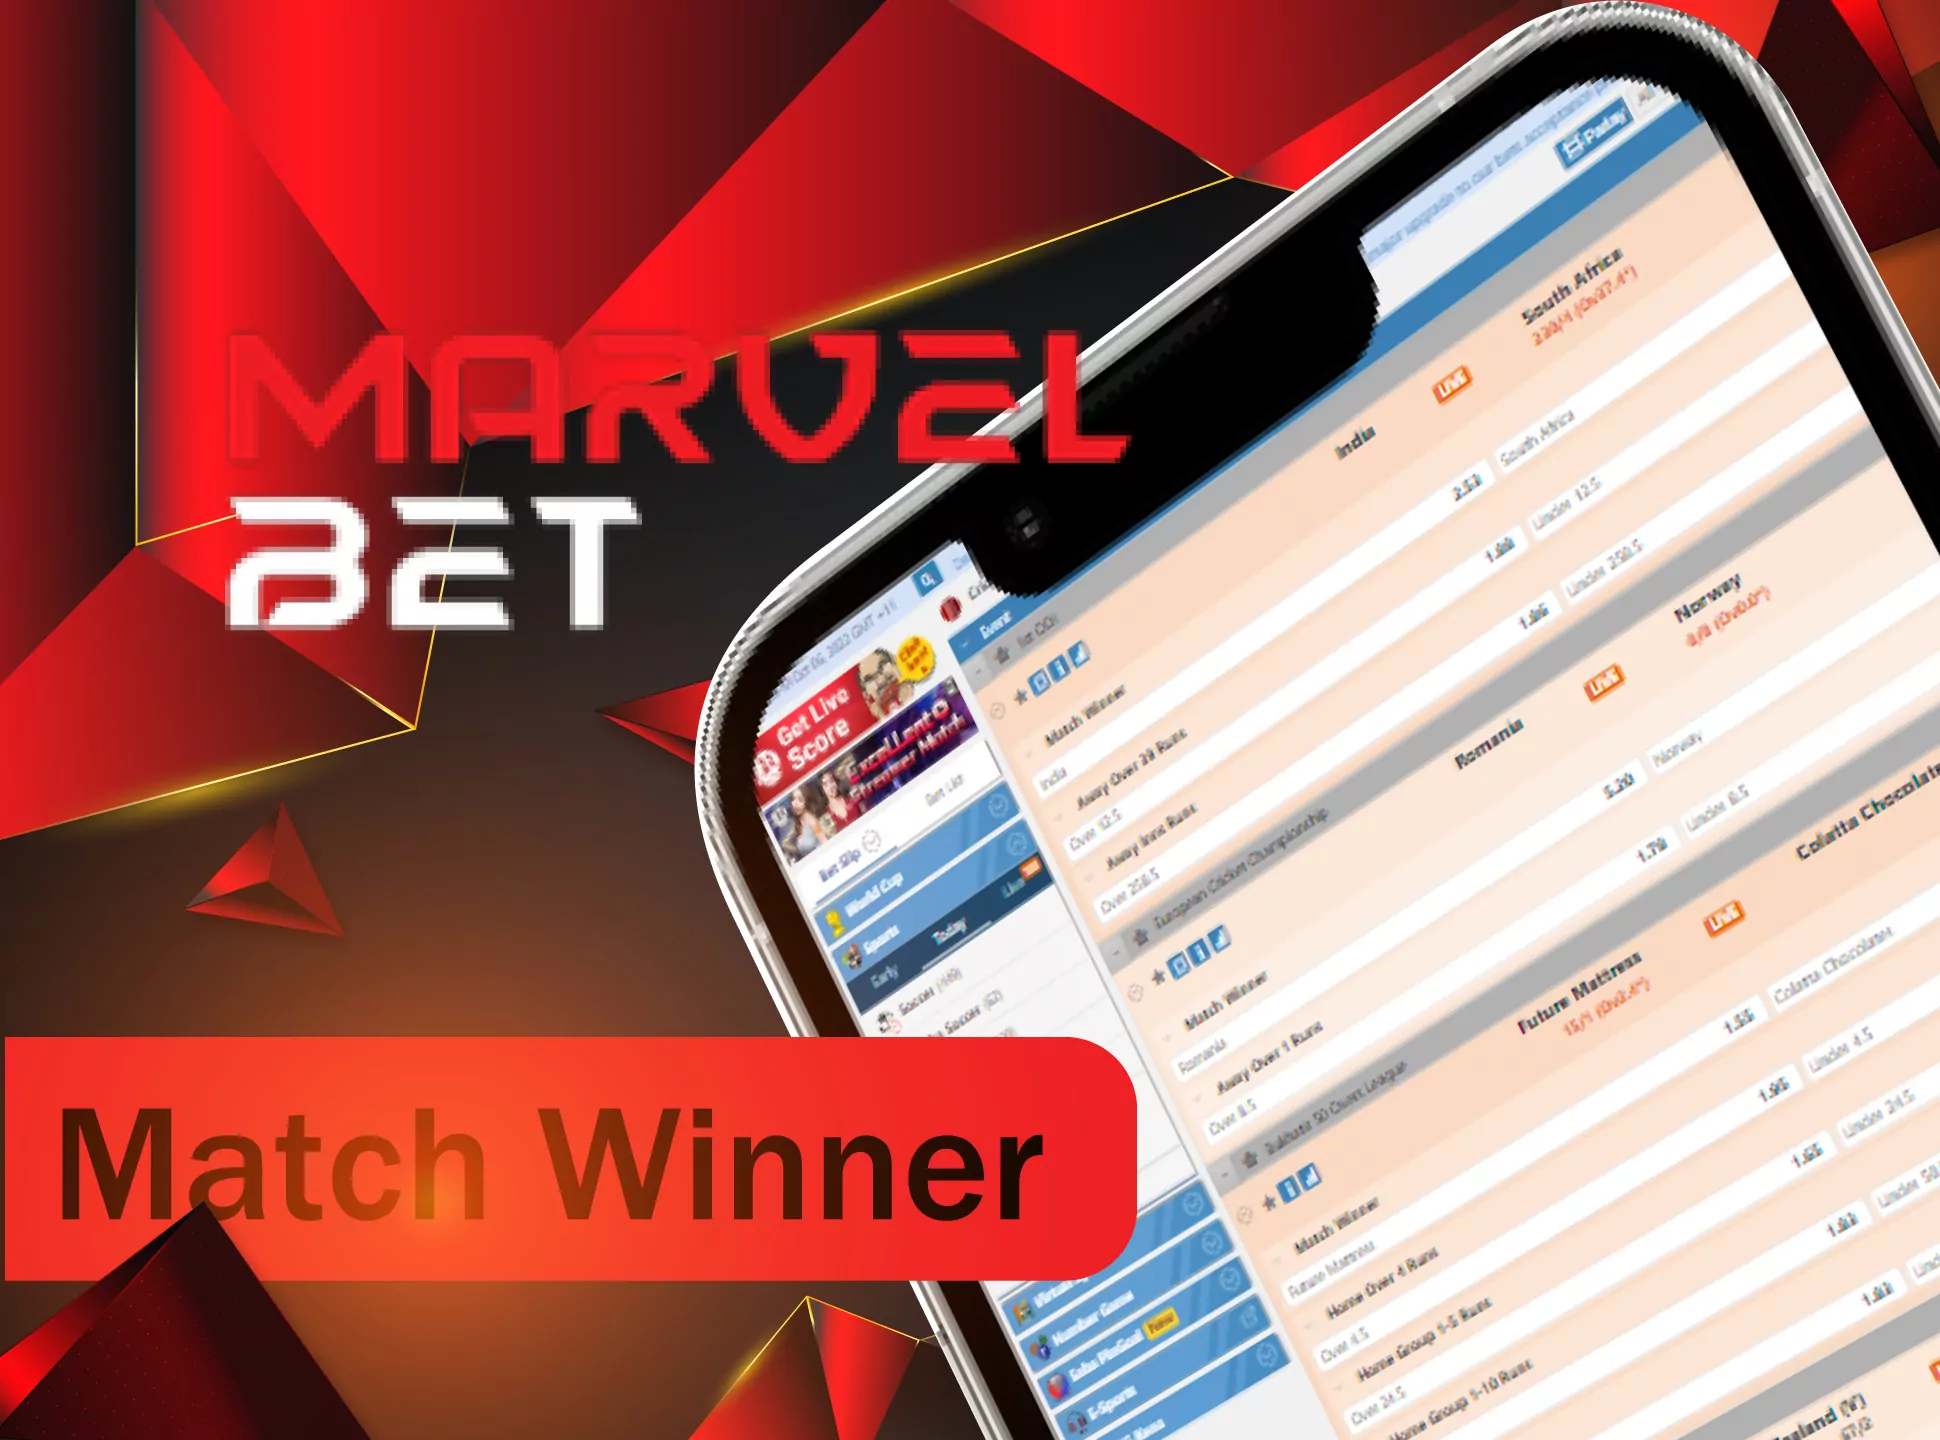 Bet on the winner of the match and win money at Marvelbet.